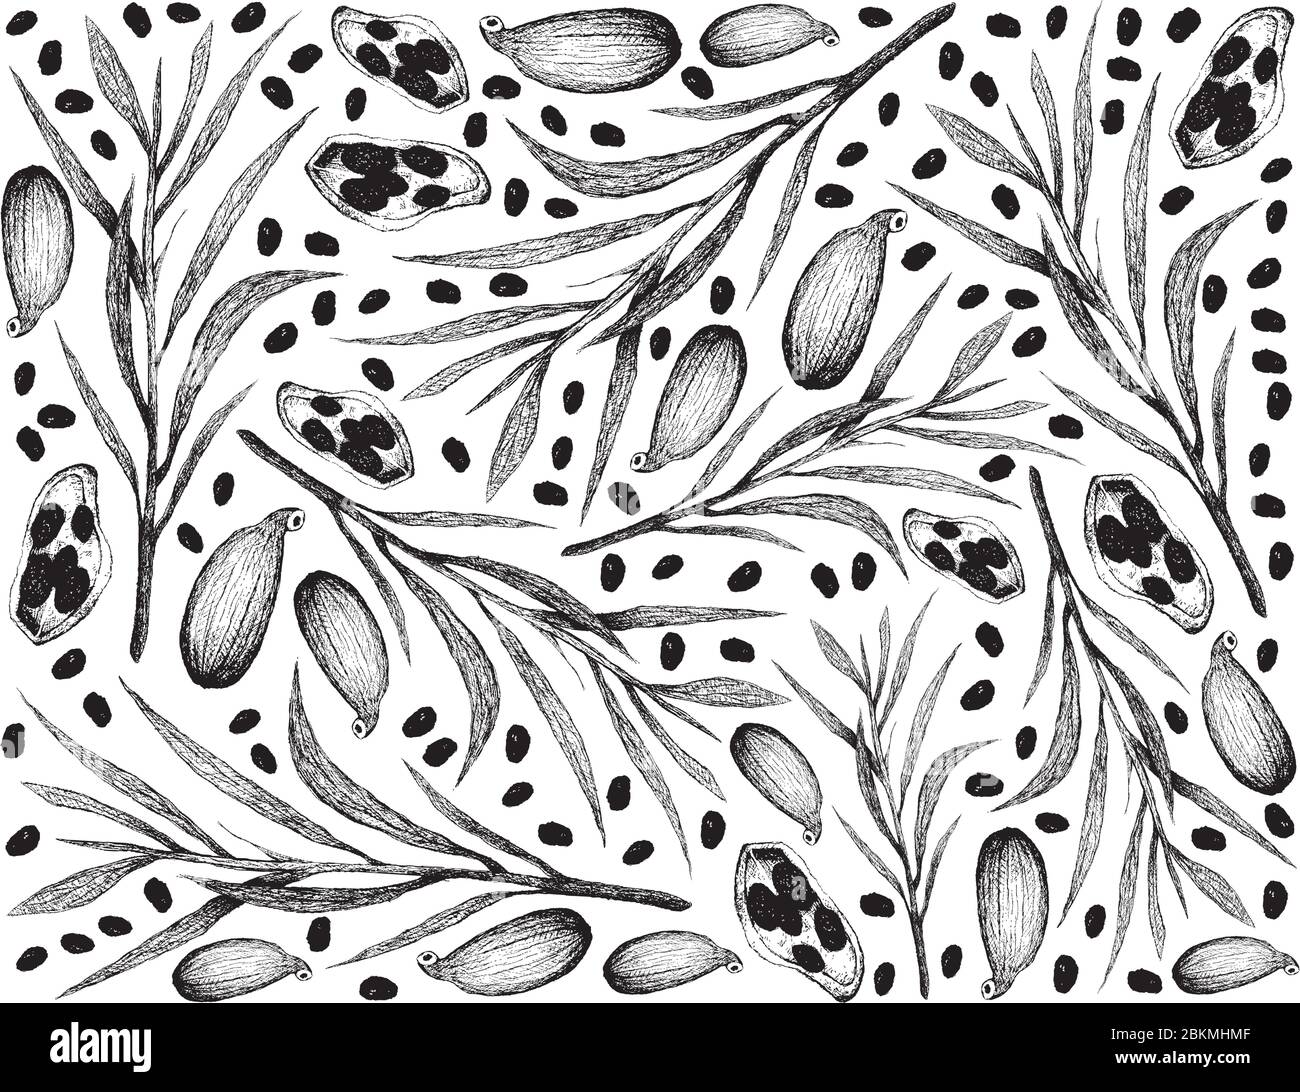 Herbal Plants, Hand Drawn Illustration of Cardamom Pods and Tarragon Used for Seasoning in Cooking. Stock Vector